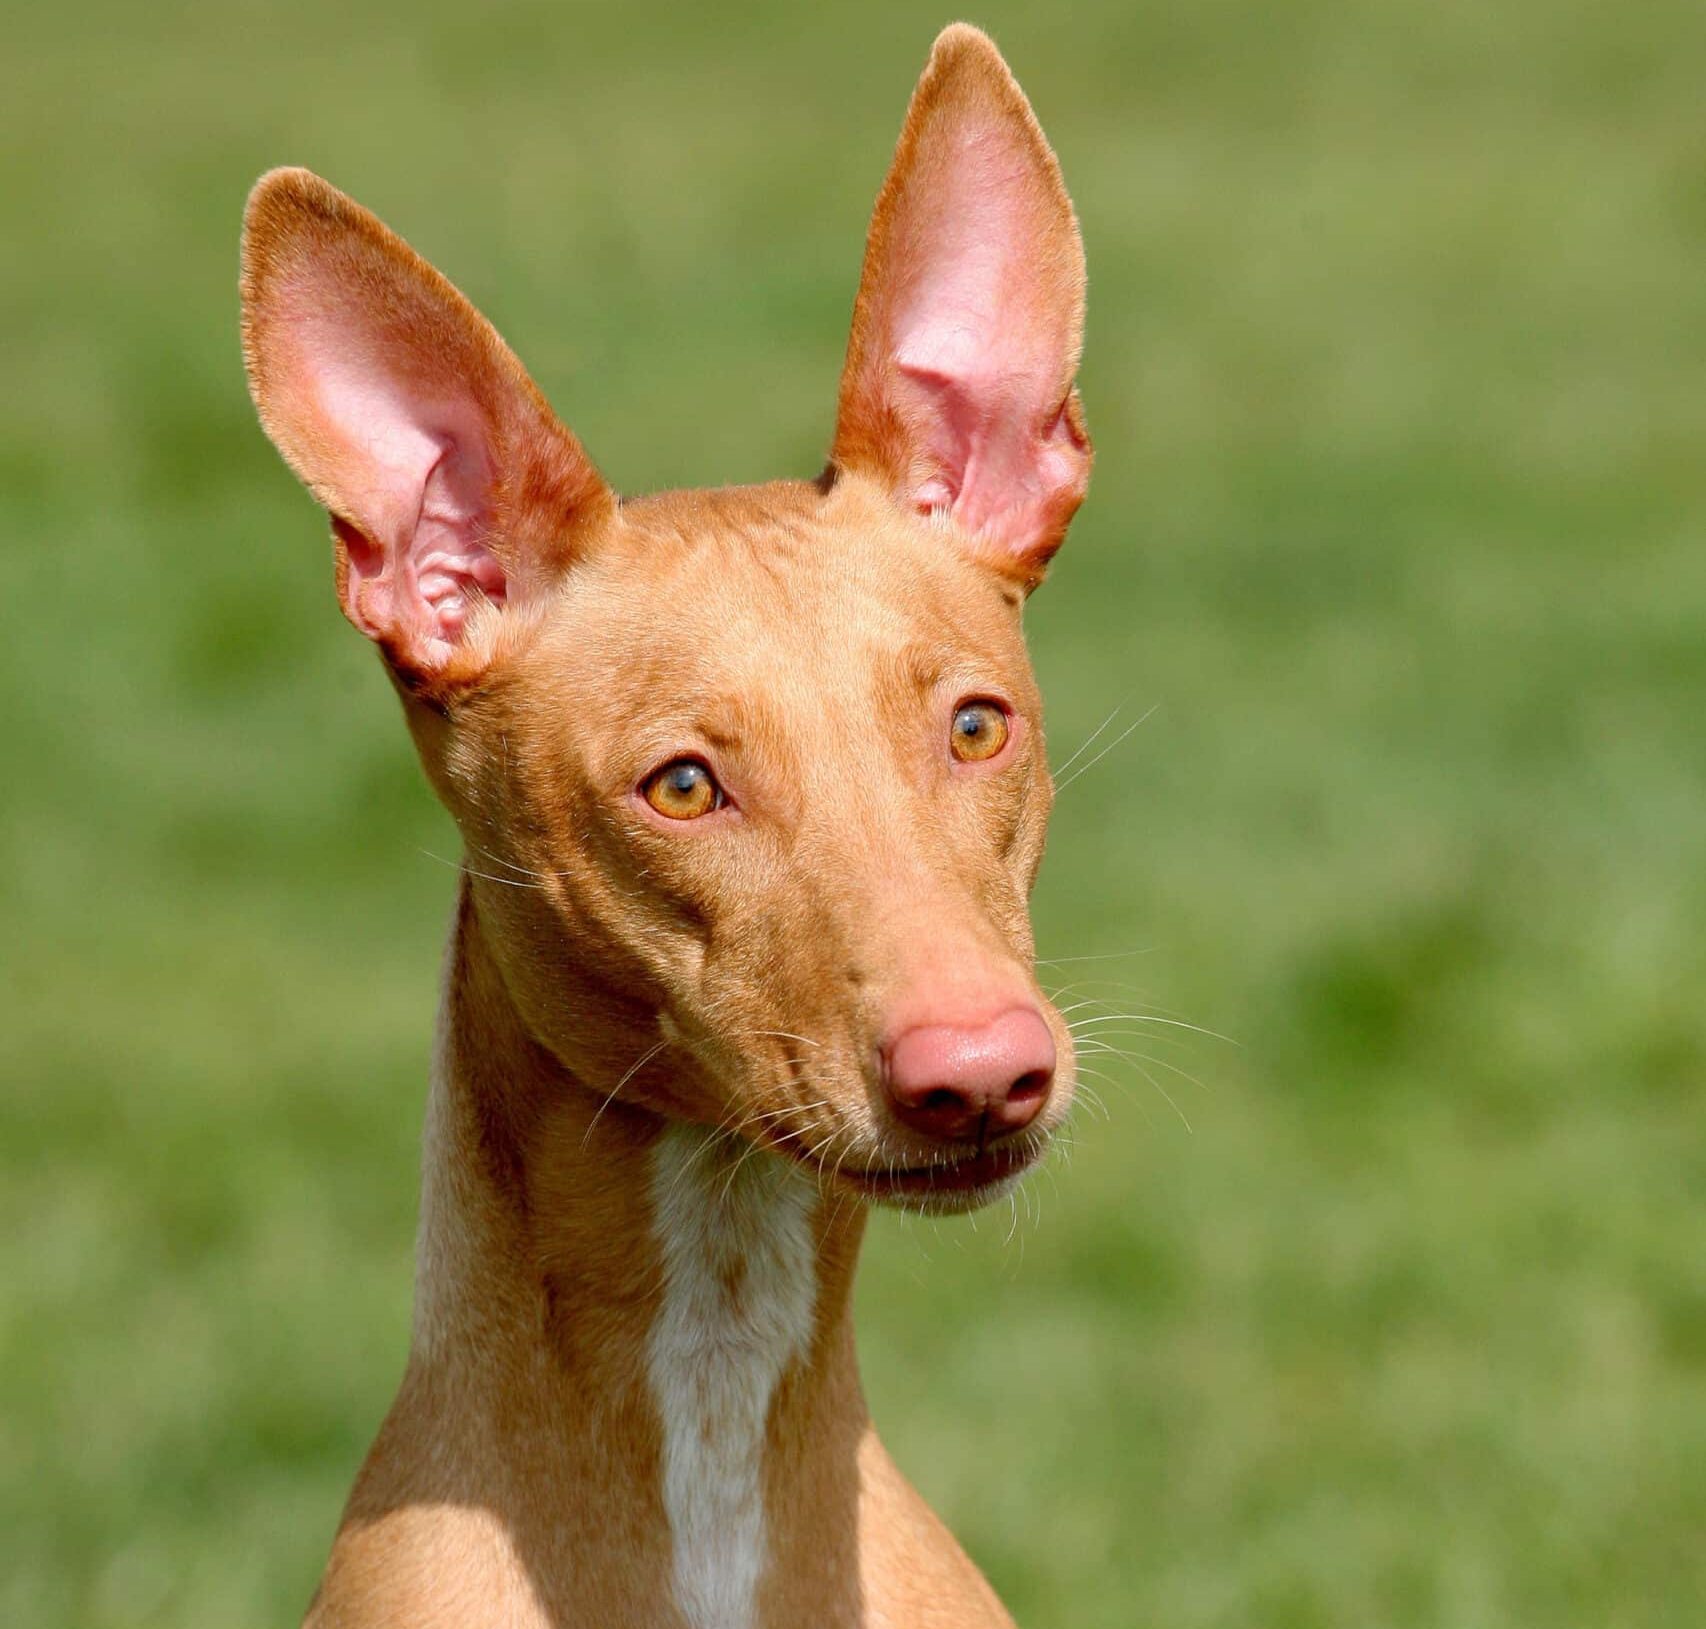 Pharaoh hound in grass looking into distance